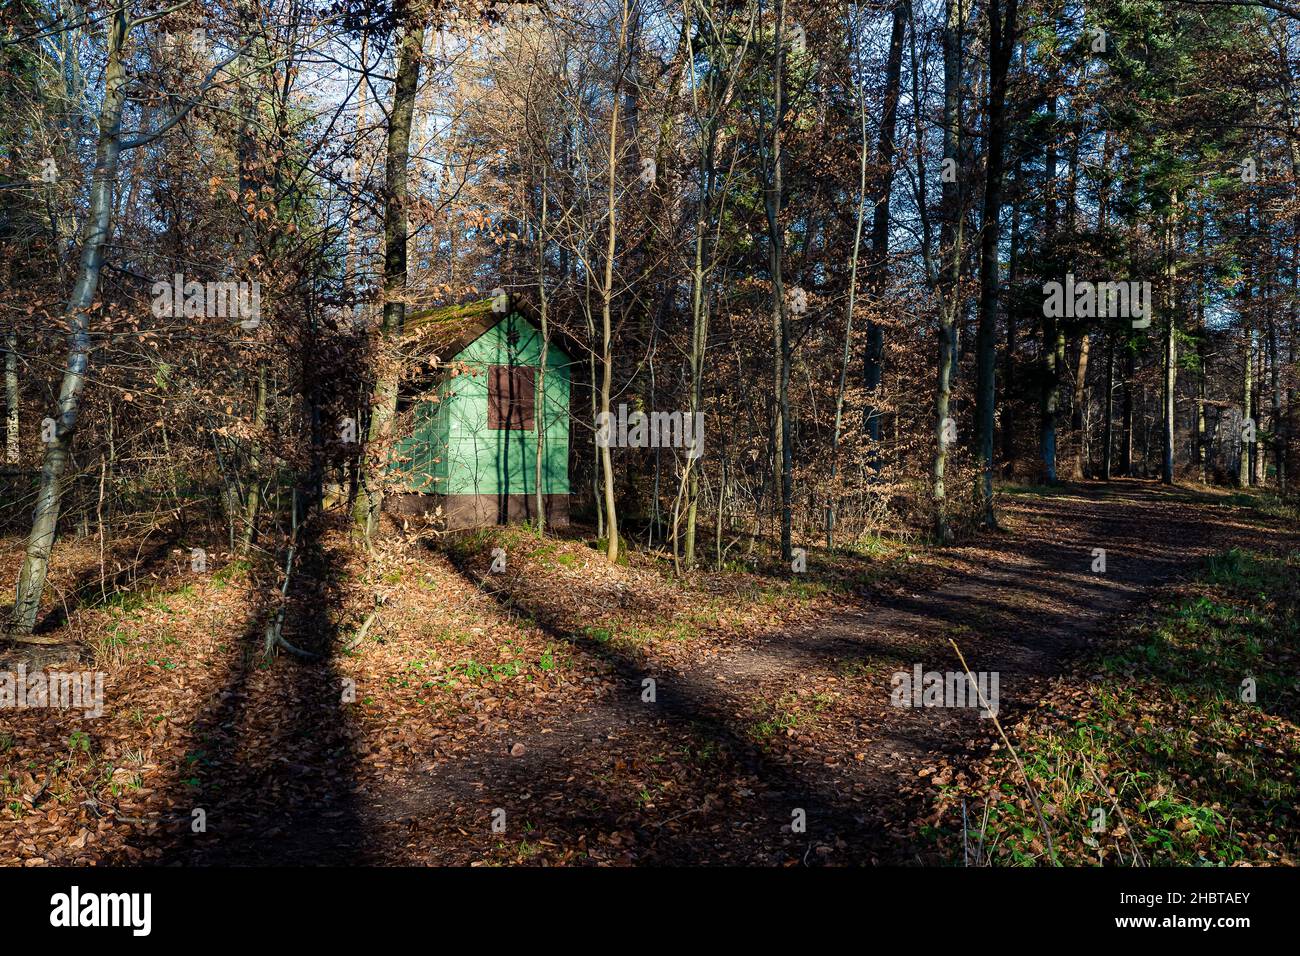 forest with a green hut and light shows in winter Stock Photo